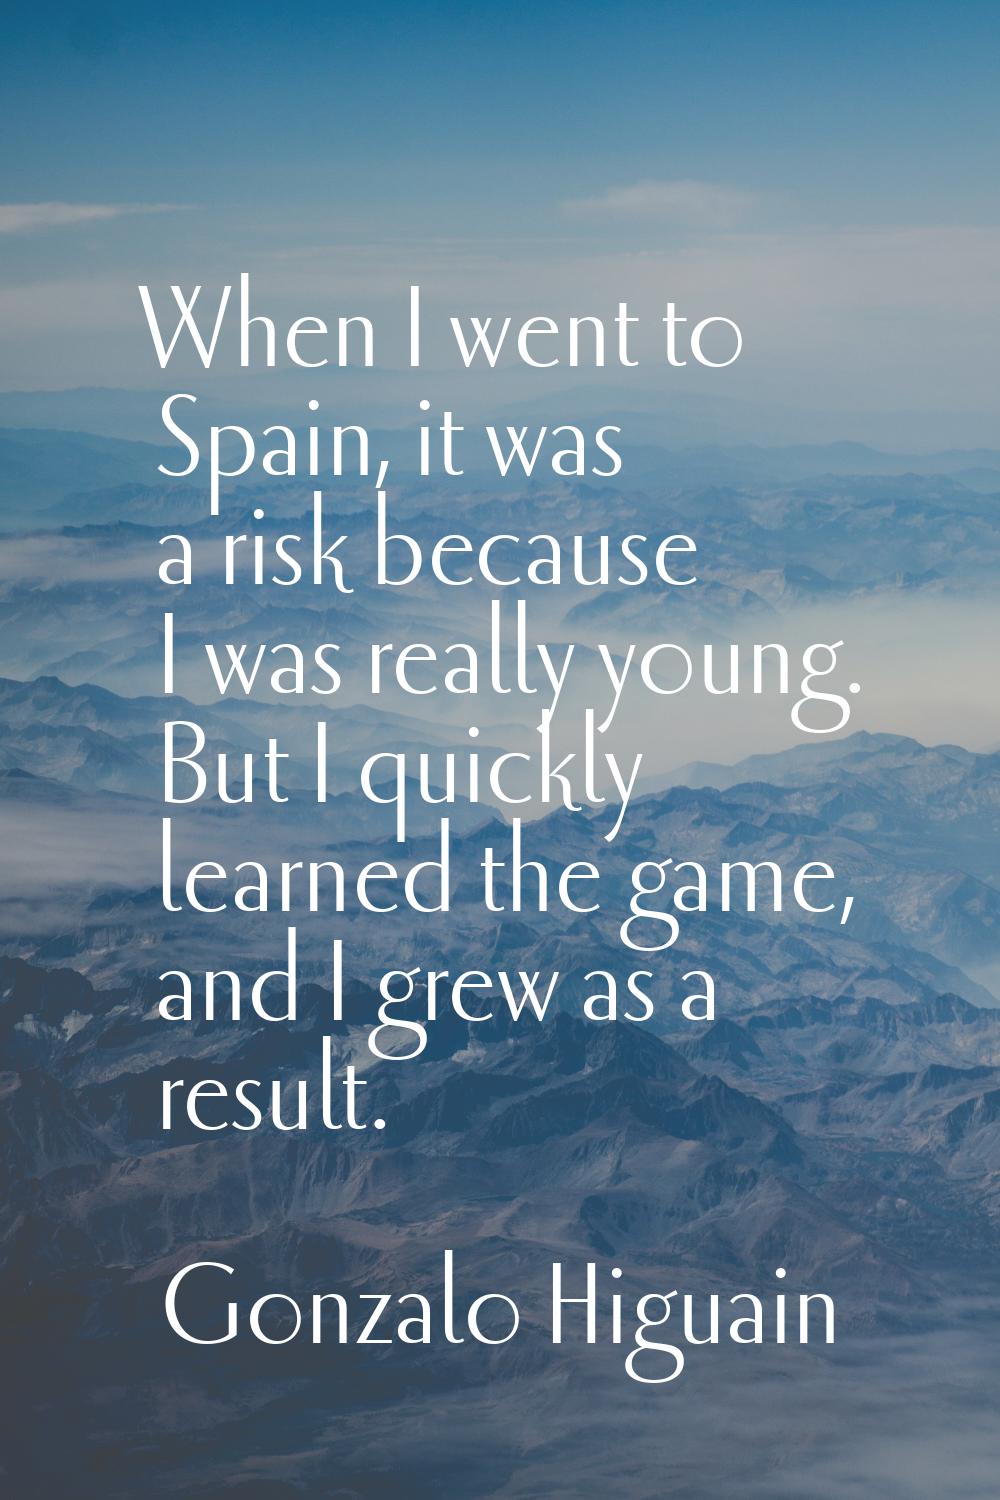 When I went to Spain, it was a risk because I was really young. But I quickly learned the game, and